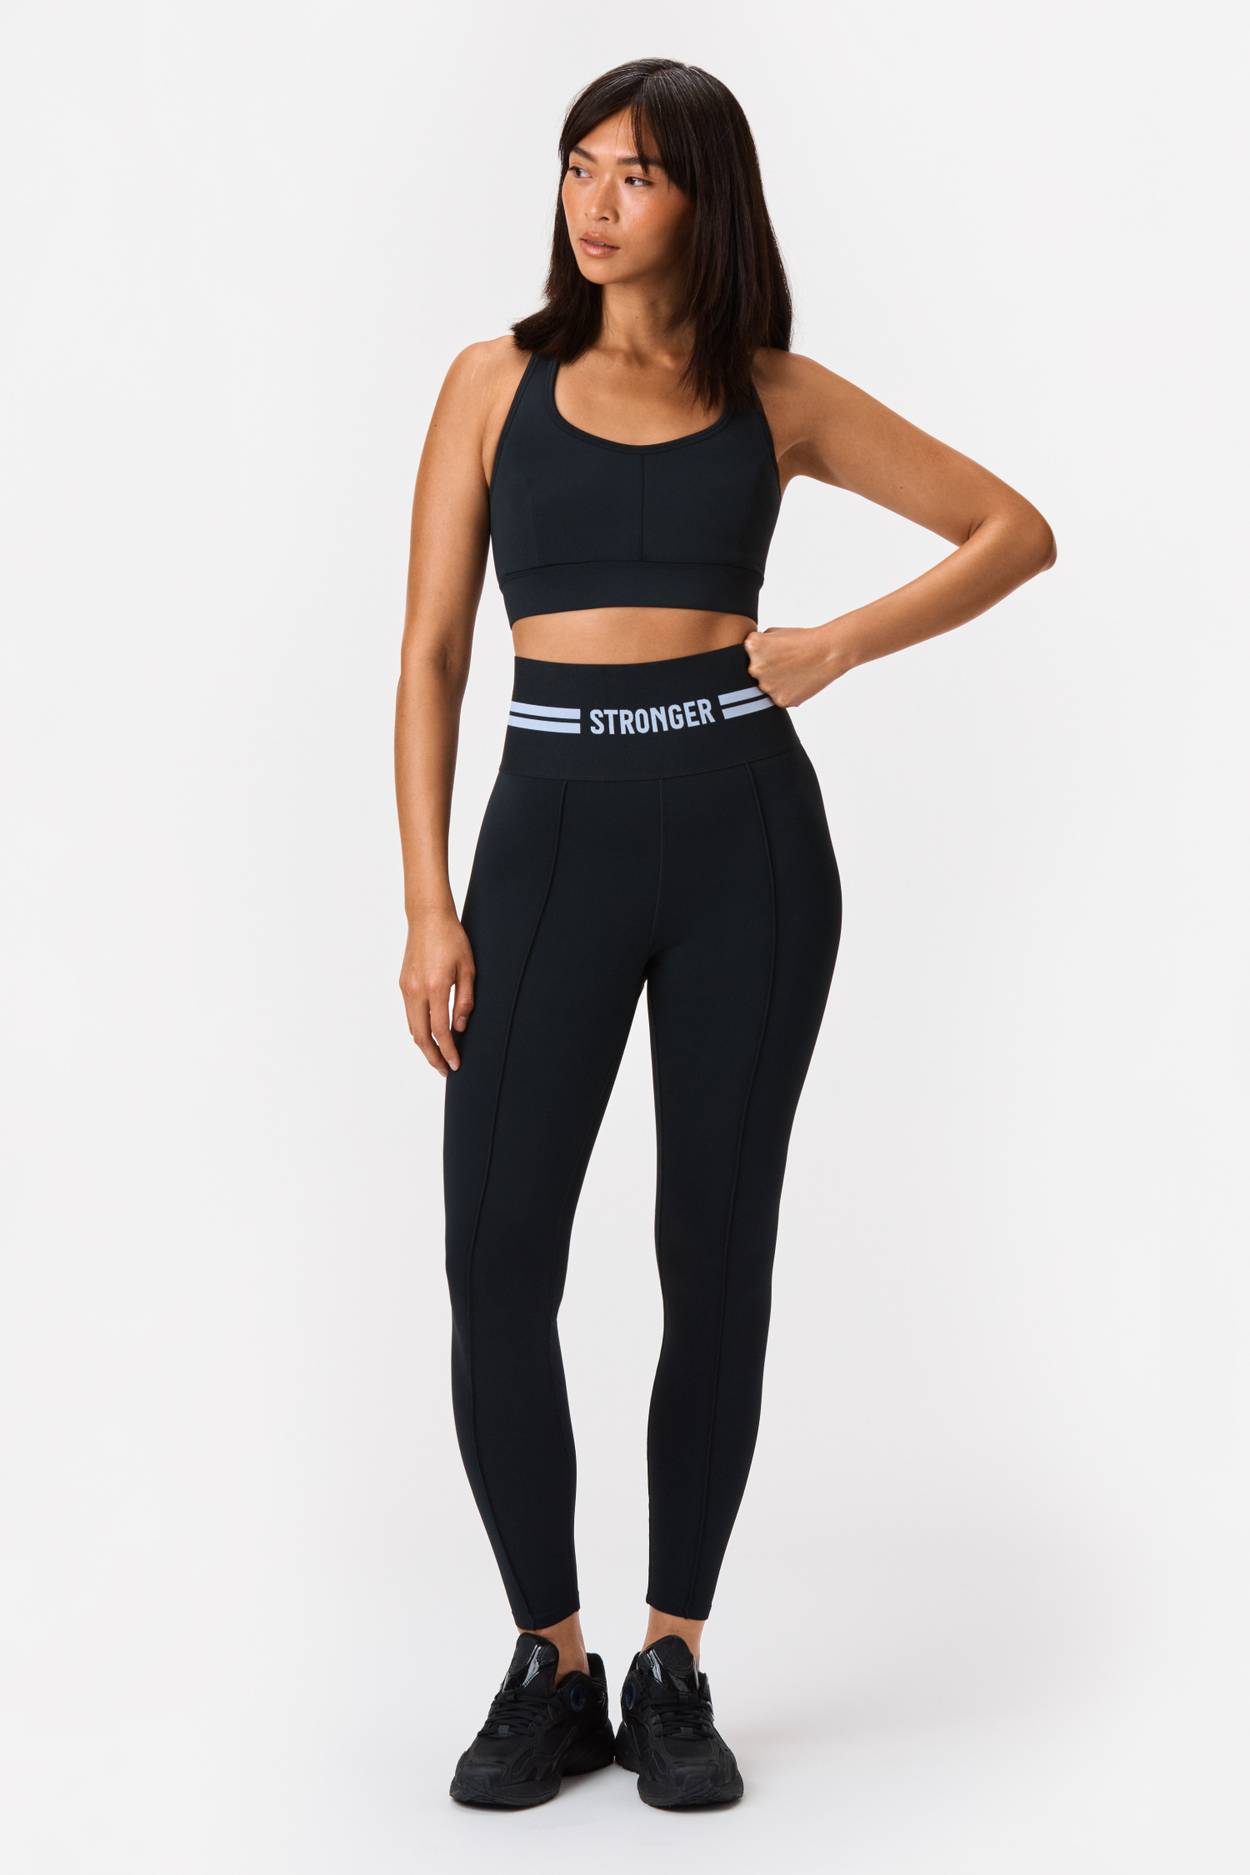 Wings for Life World Run Shop: Verve Tights